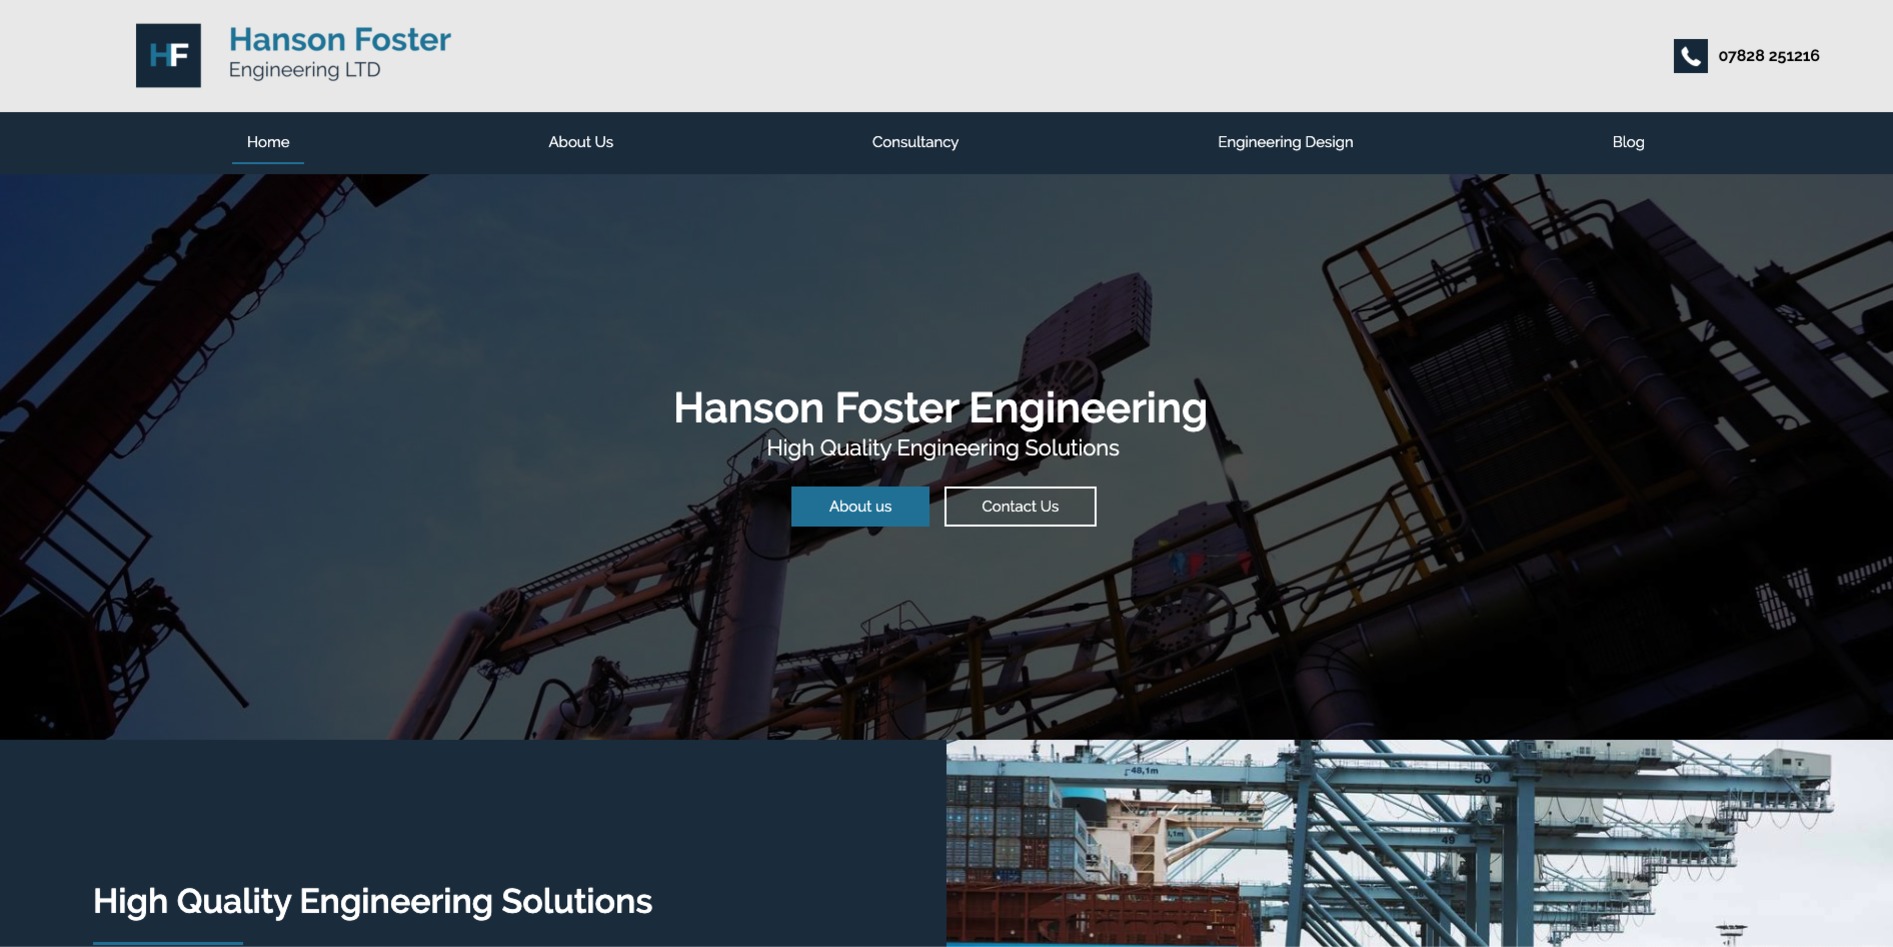 The new Hanson Foster Engineering website designed by it'seeze, displayed on desktop